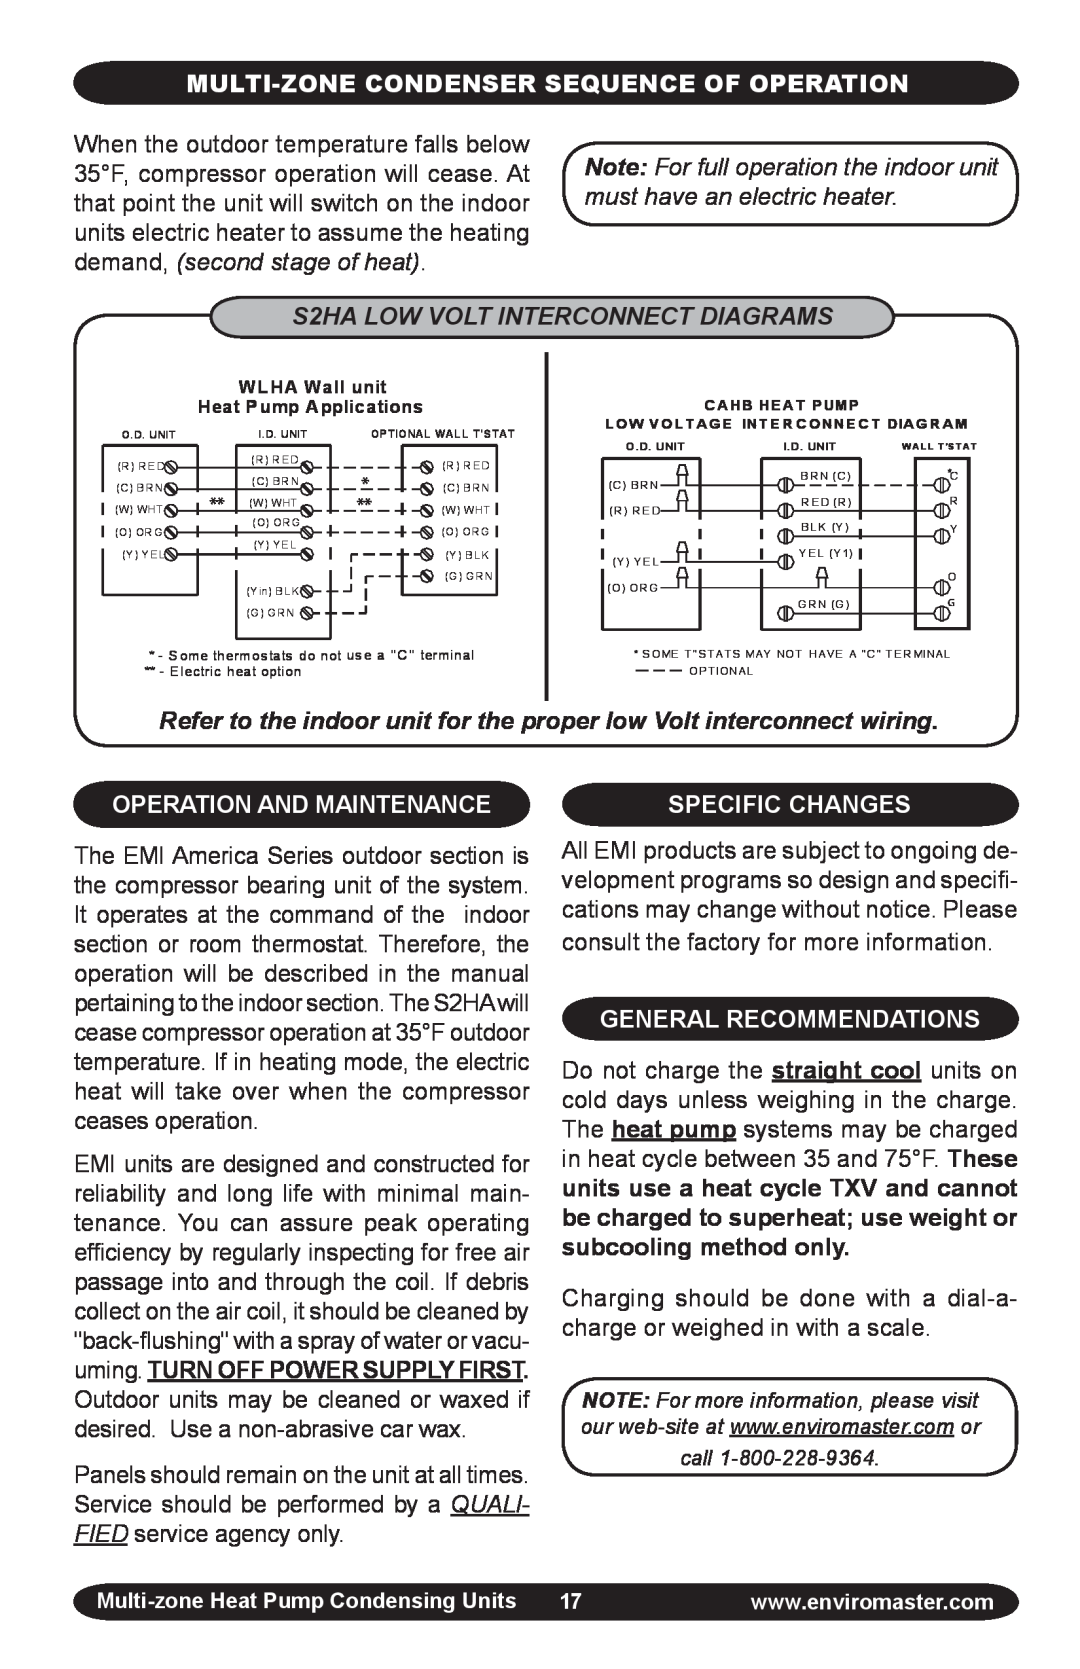 EMI EMI Corp S2HA LOW VOLT INTERCONNECT DIAGRAMS, Operation And Maintenance, Specific Changes, General Recommendations 